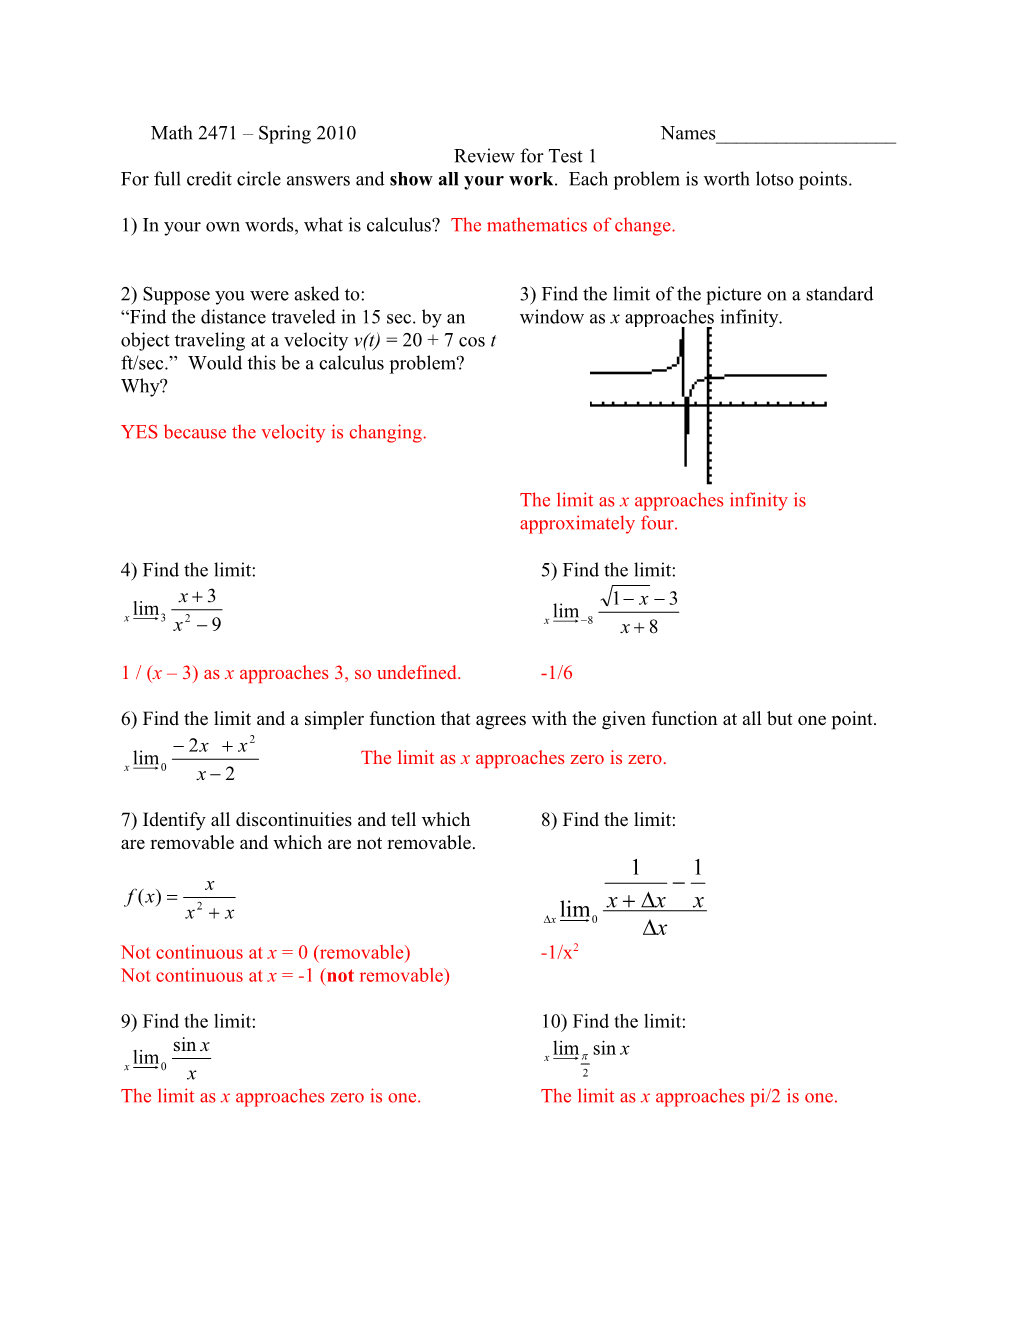 Math 1470 Spring 2002 (Section 1)